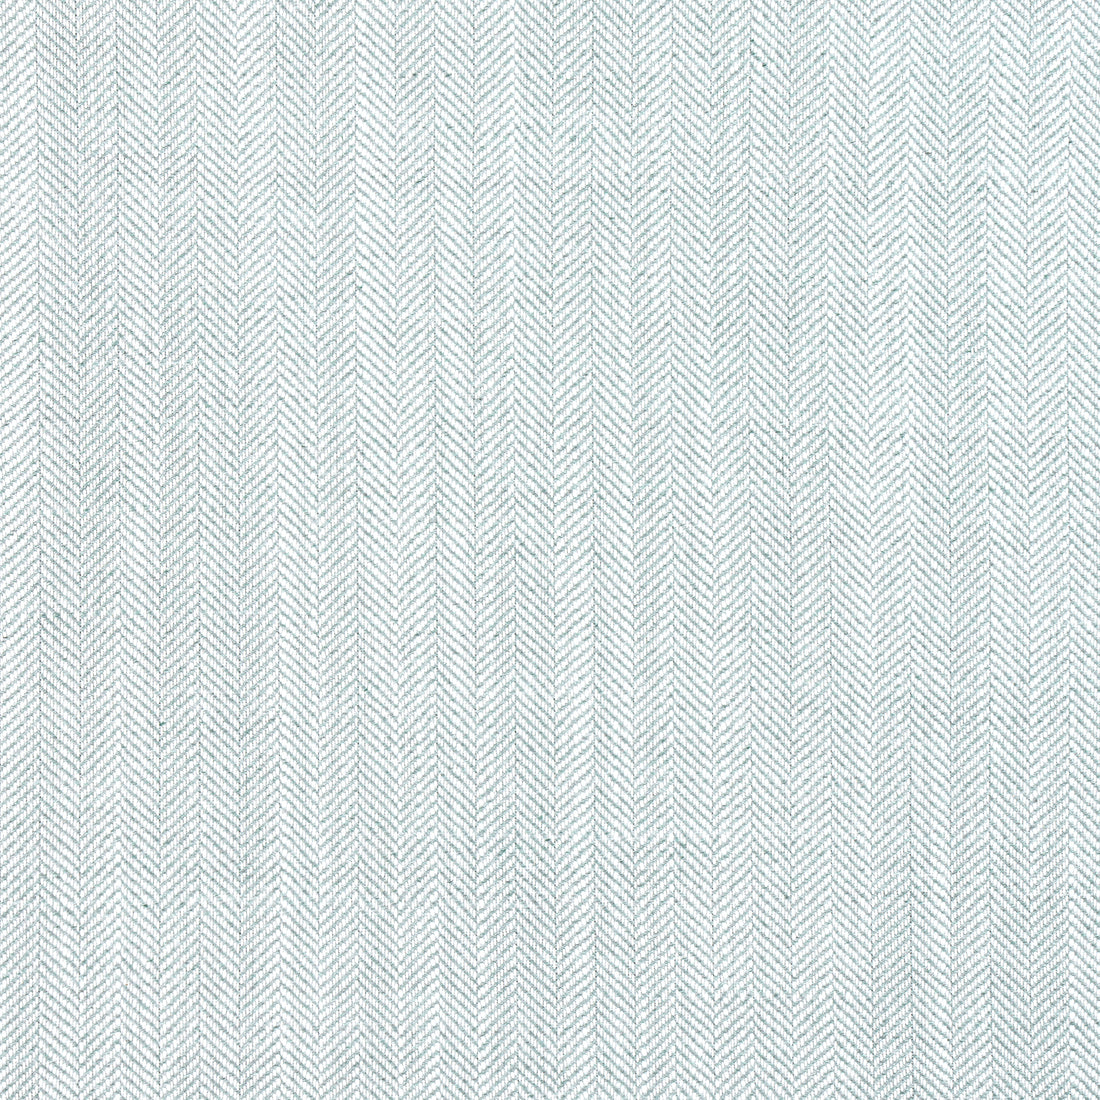 Savile fabric in seafoam color - pattern number W8565 - by Thibaut in the Villa Textures collection